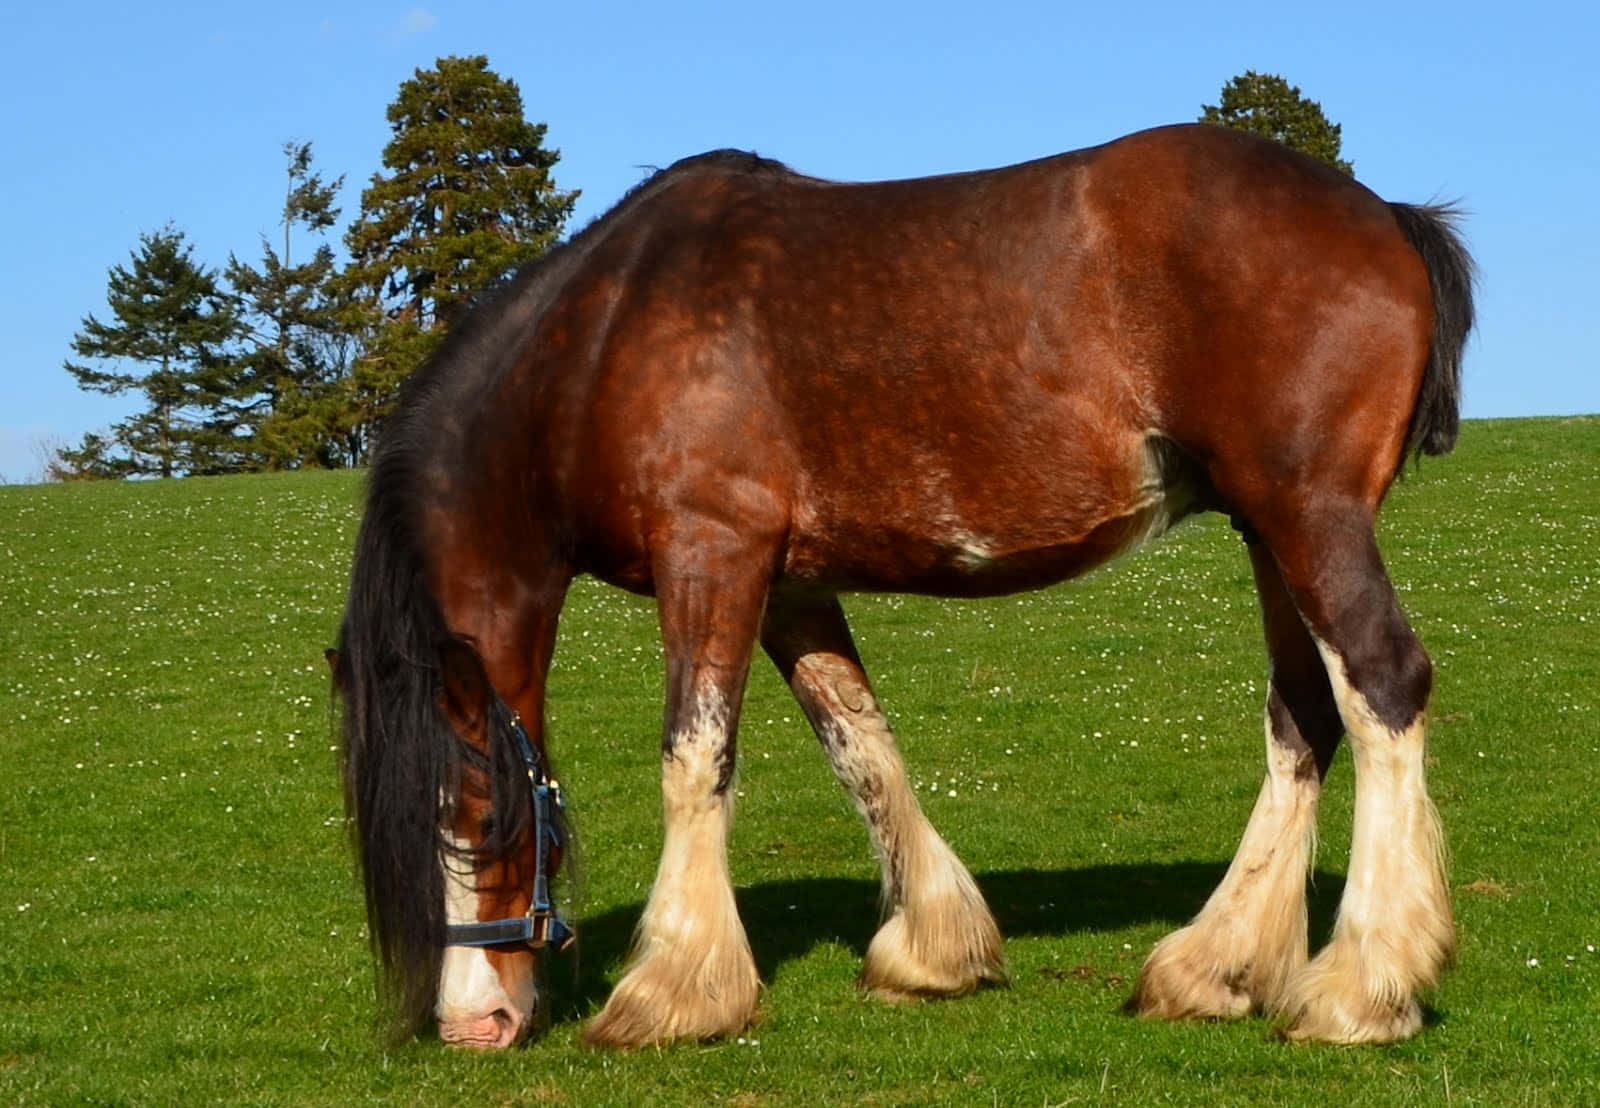 A majestic Clydesdale Horse proudly prancing in the countryside.